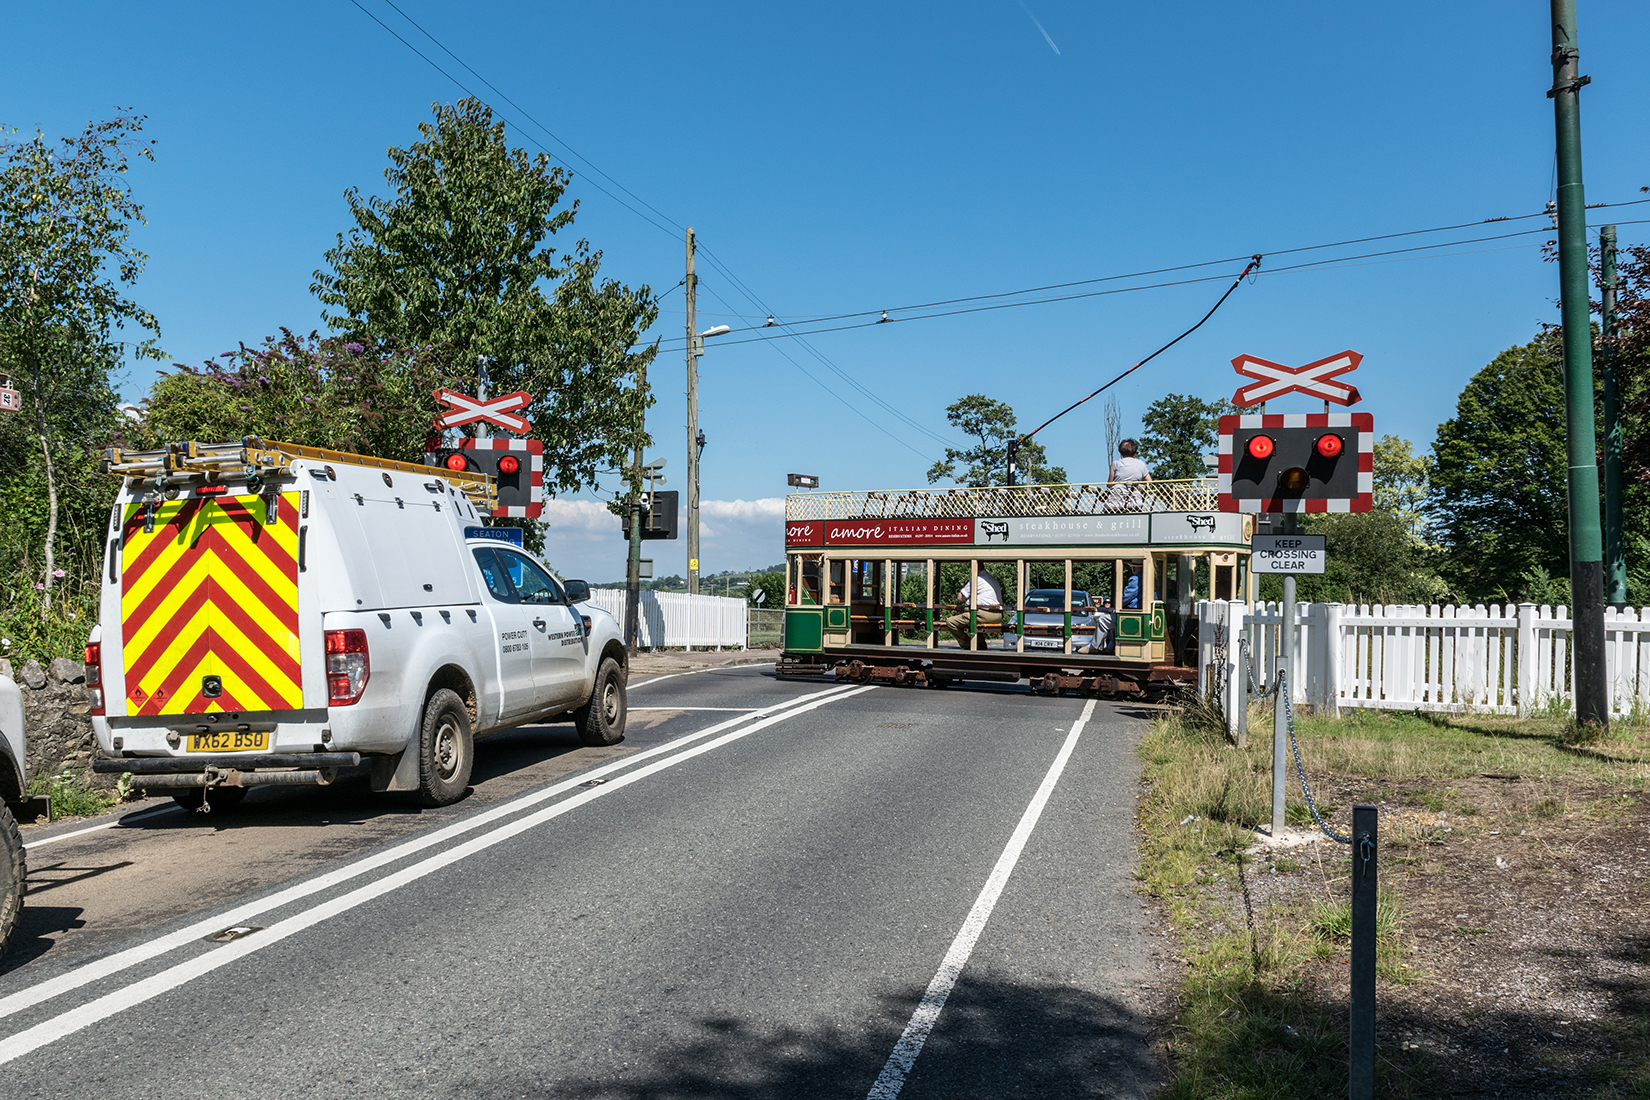 Traffic held for car 6 at Colyford level crossing